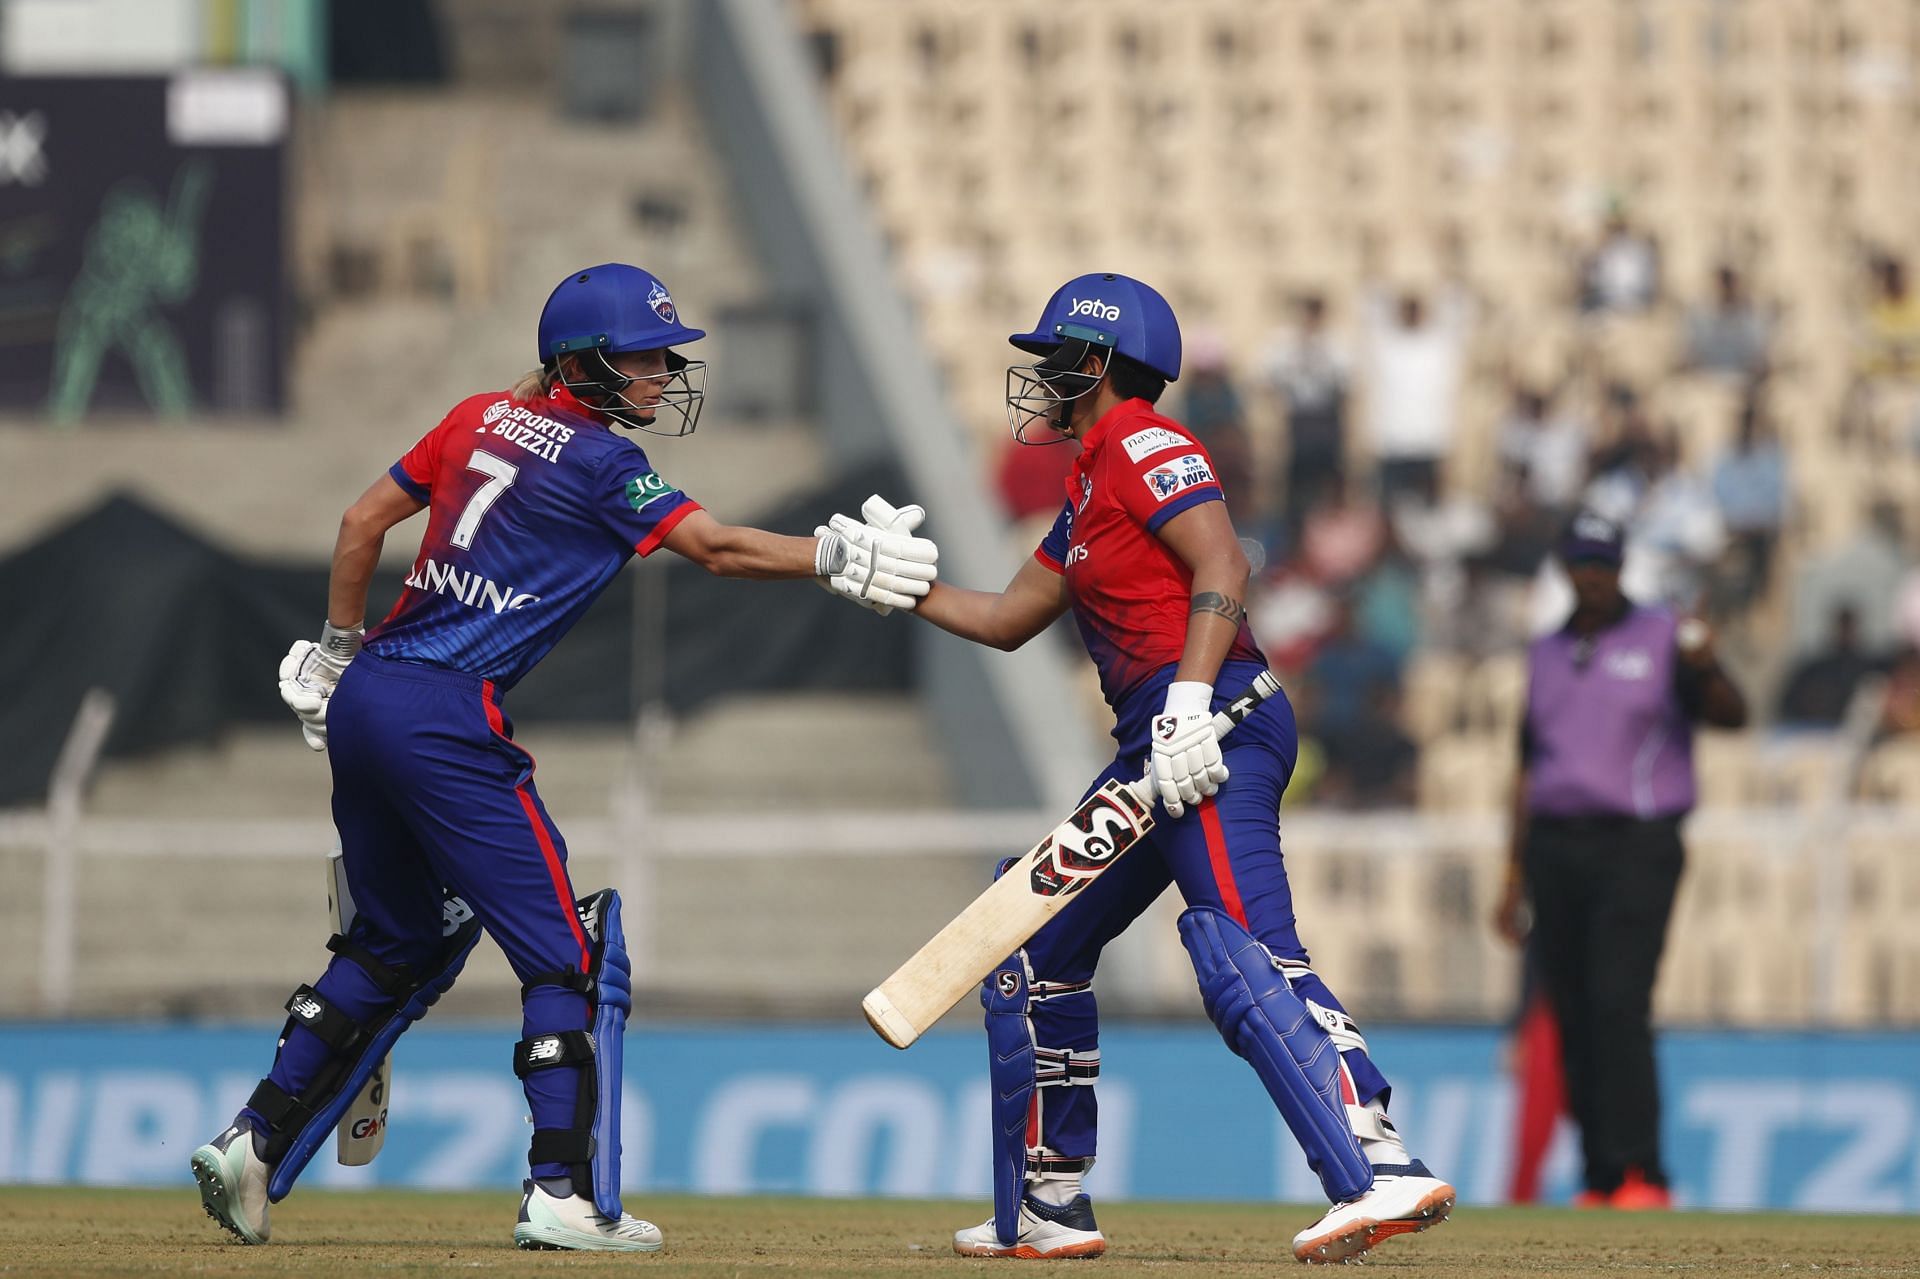 Shafali Verma and Meg Lanning in action: WPL 2023 - Royal Challengers Bangalore v Delhi Capitals